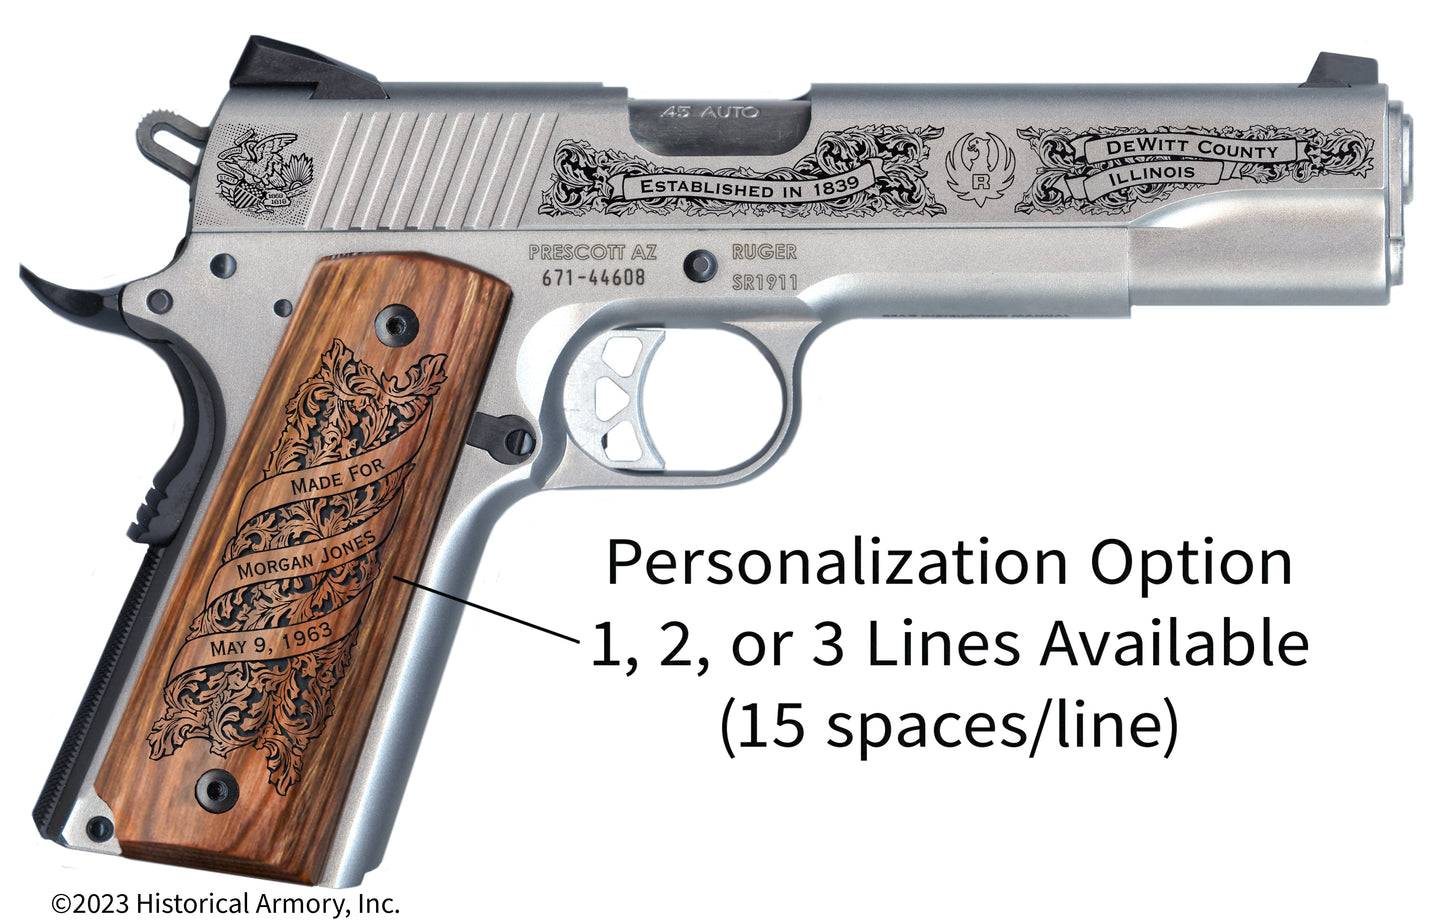 DeWitt County Illinois Personalized Engraved .45 Auto Ruger 1911